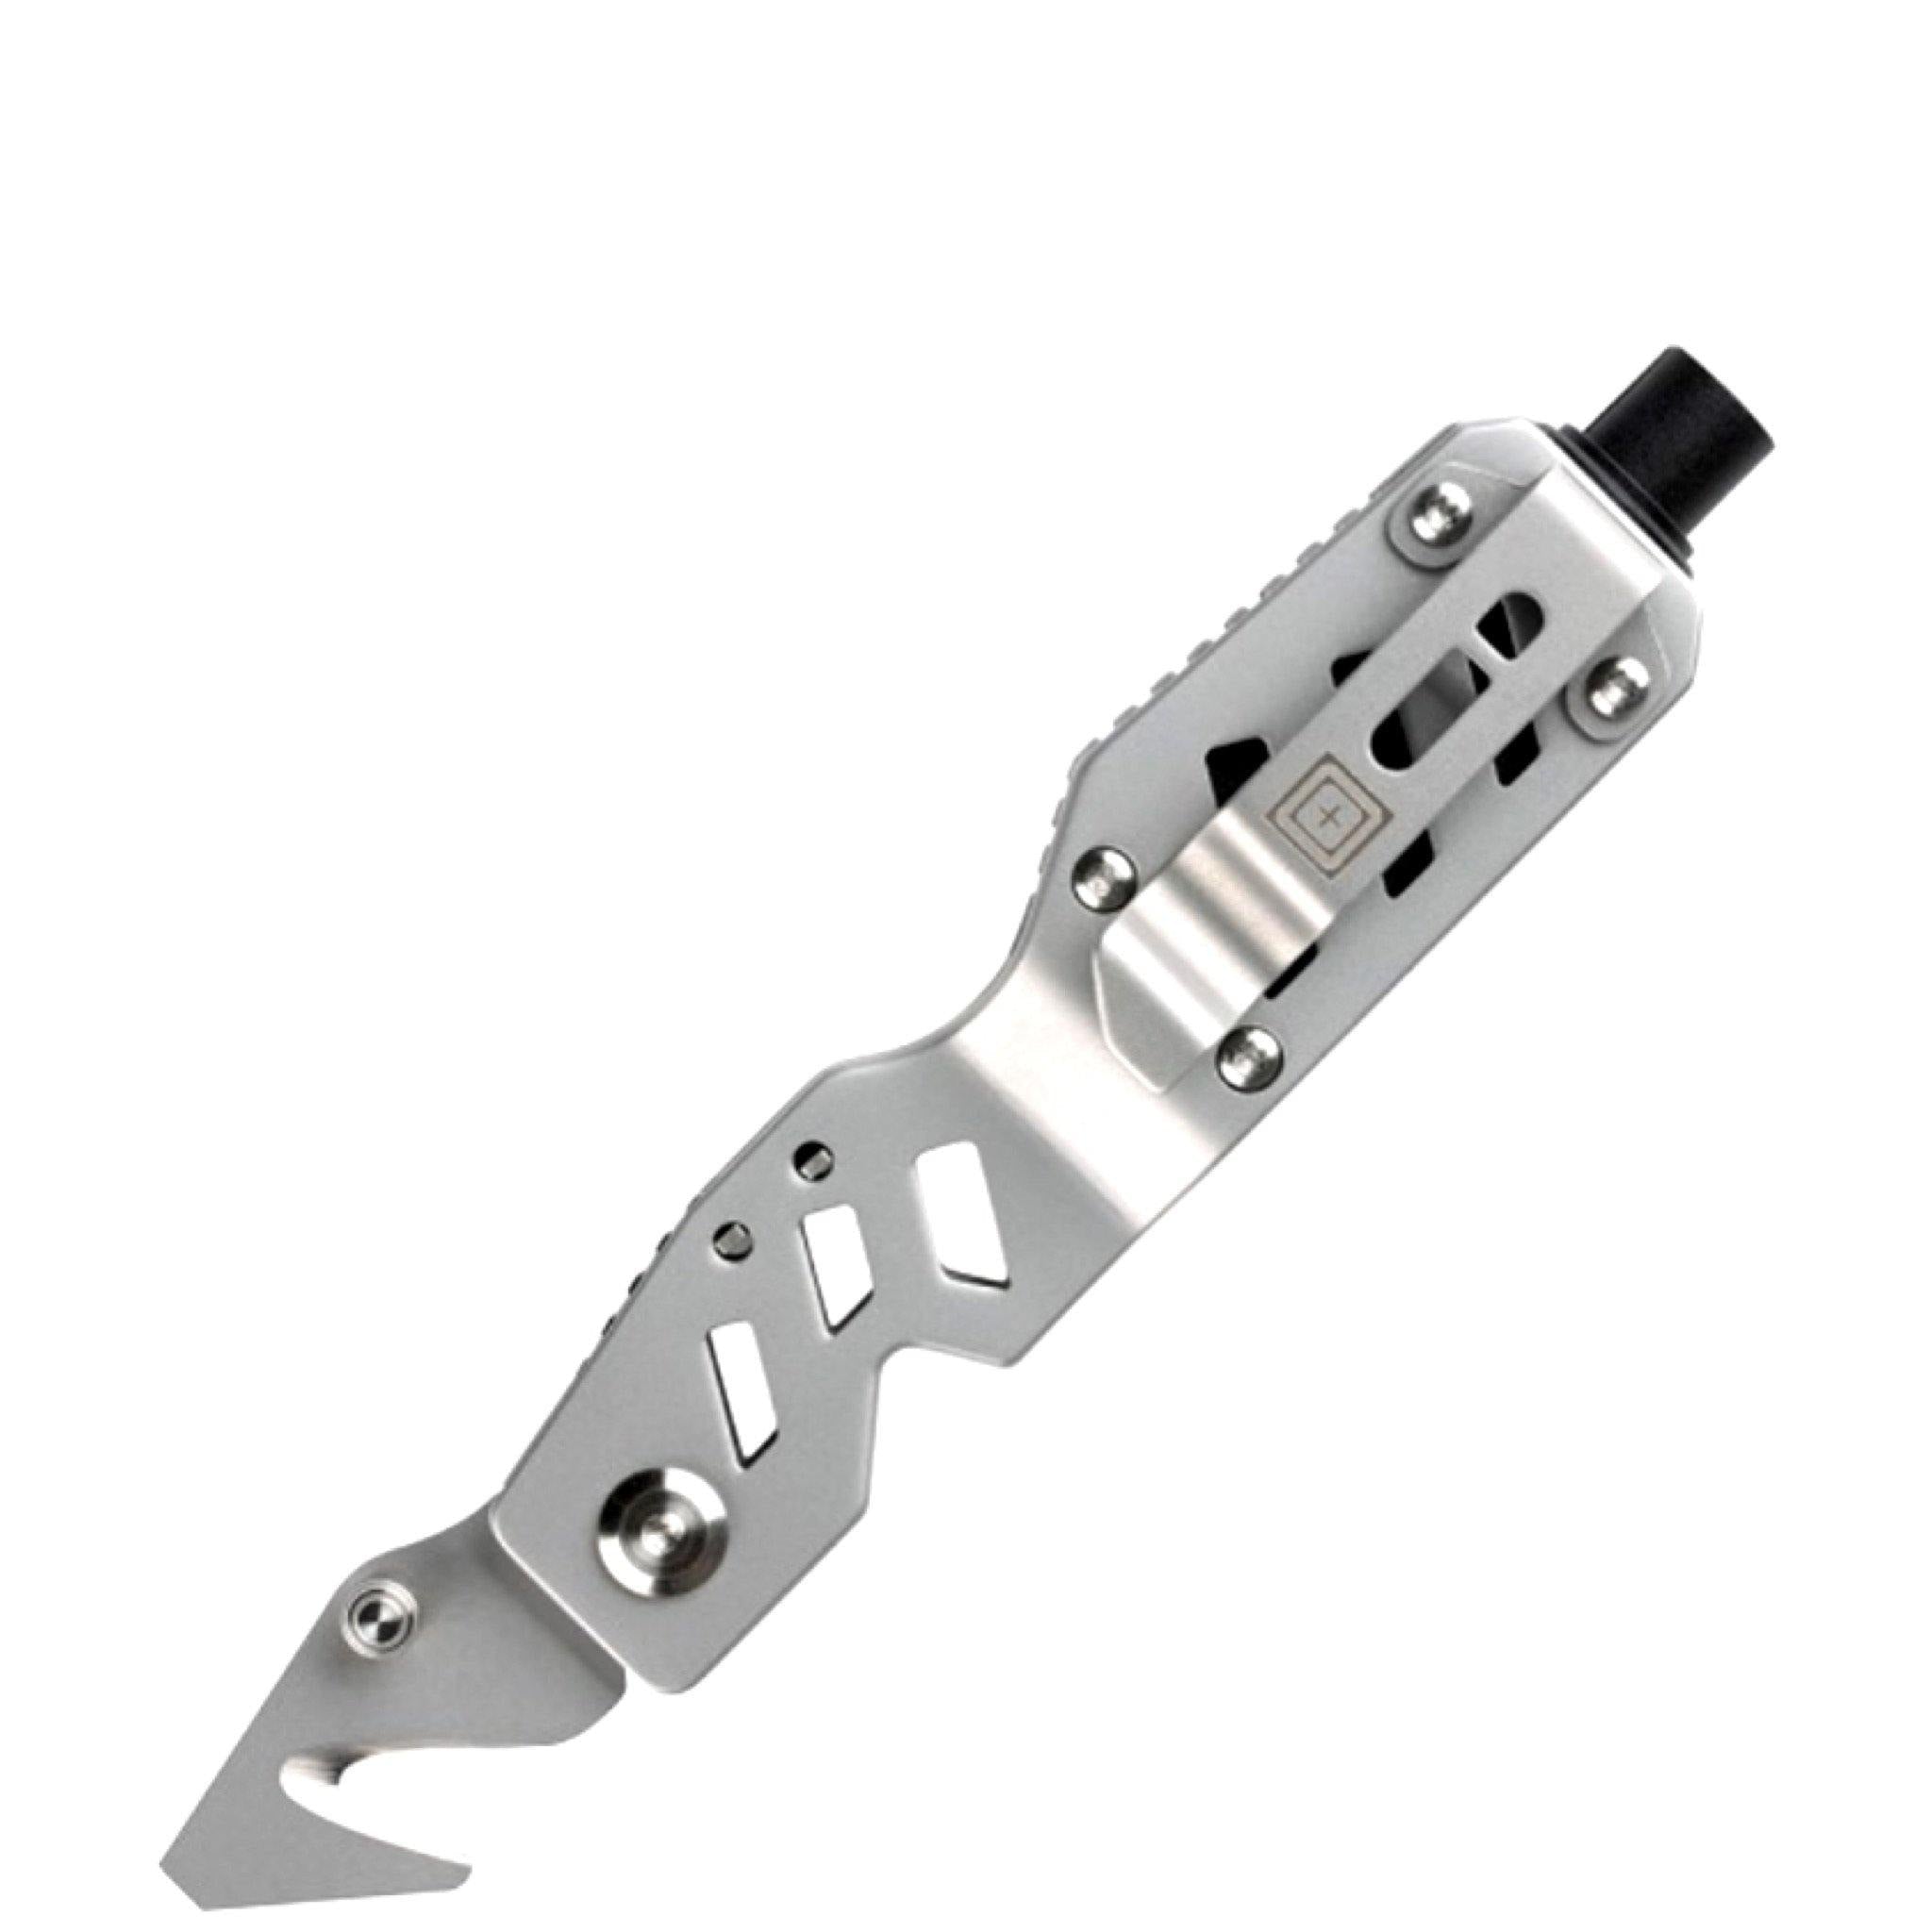 ESC Rescue Tool Multifunction Tools & Knives Shield Protection Products LLC.